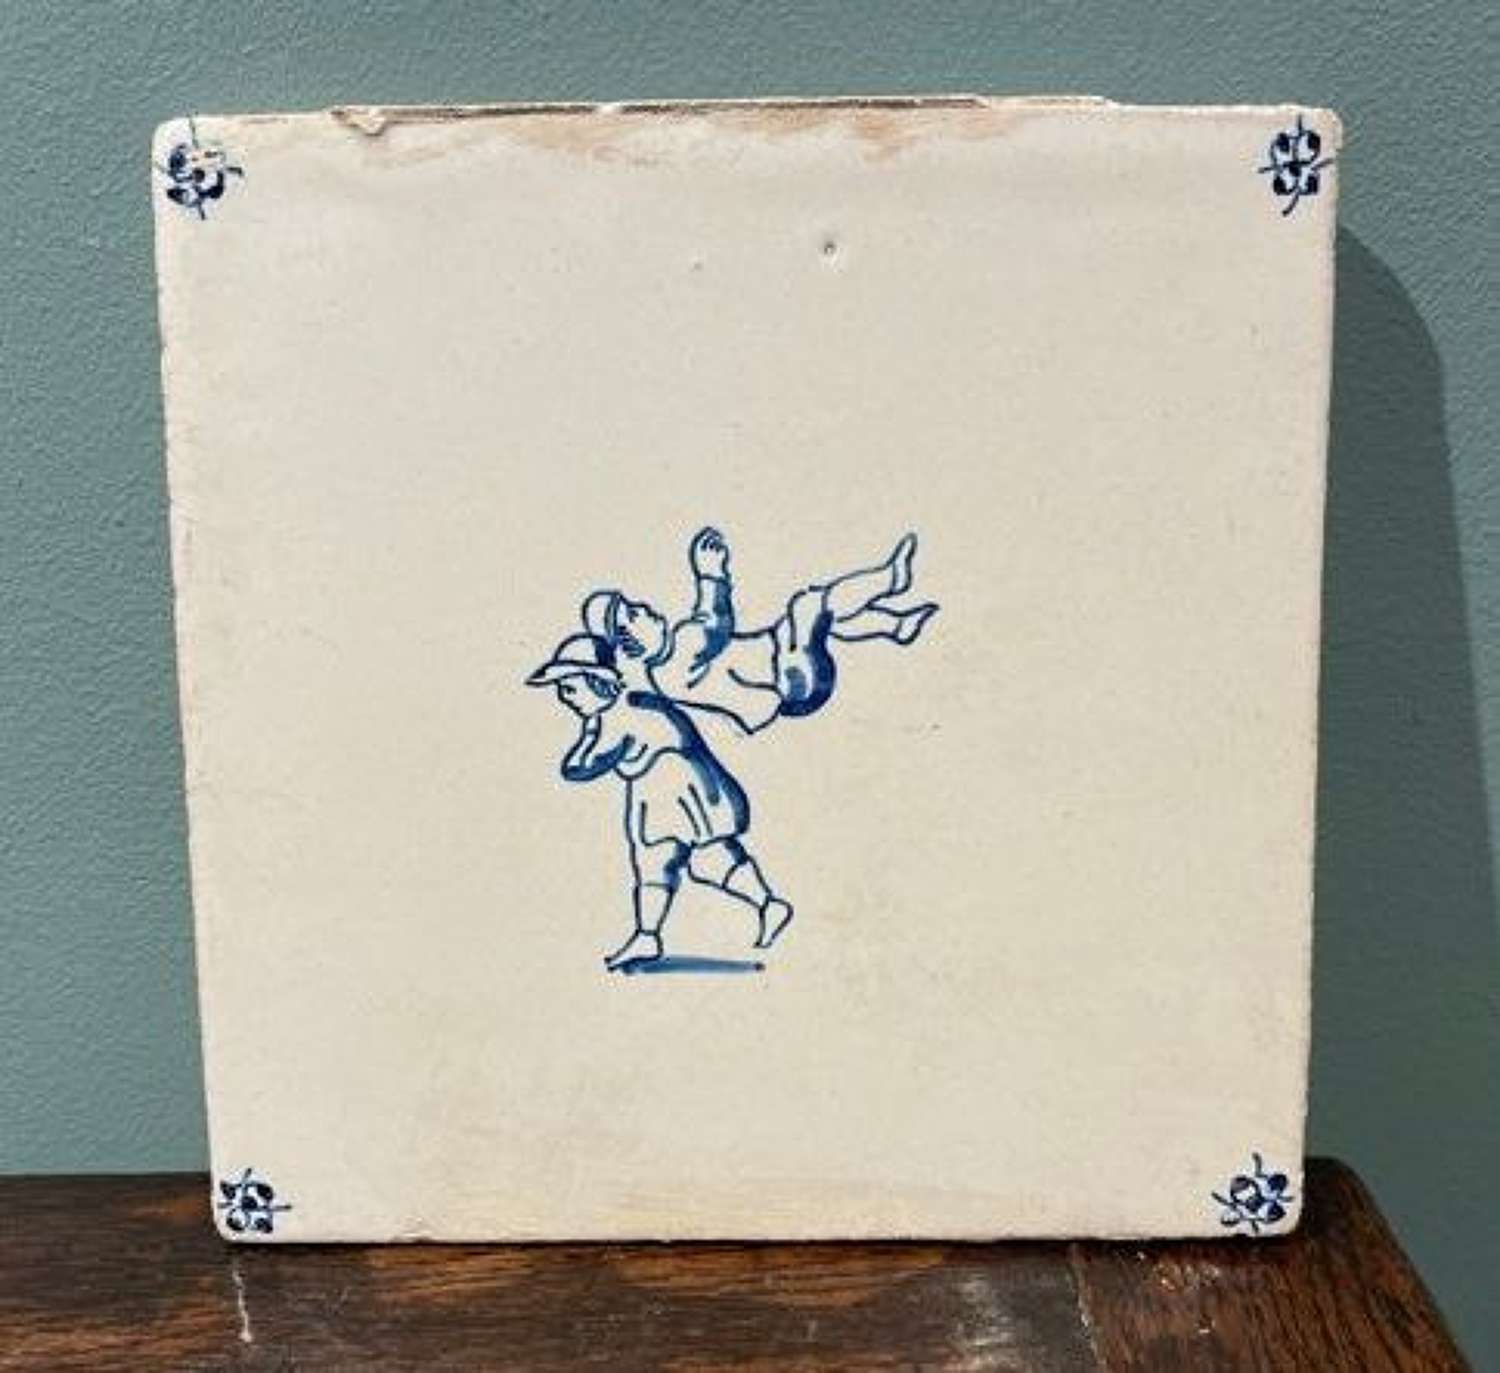 Early 19th century Dutch Delft blue and white tile